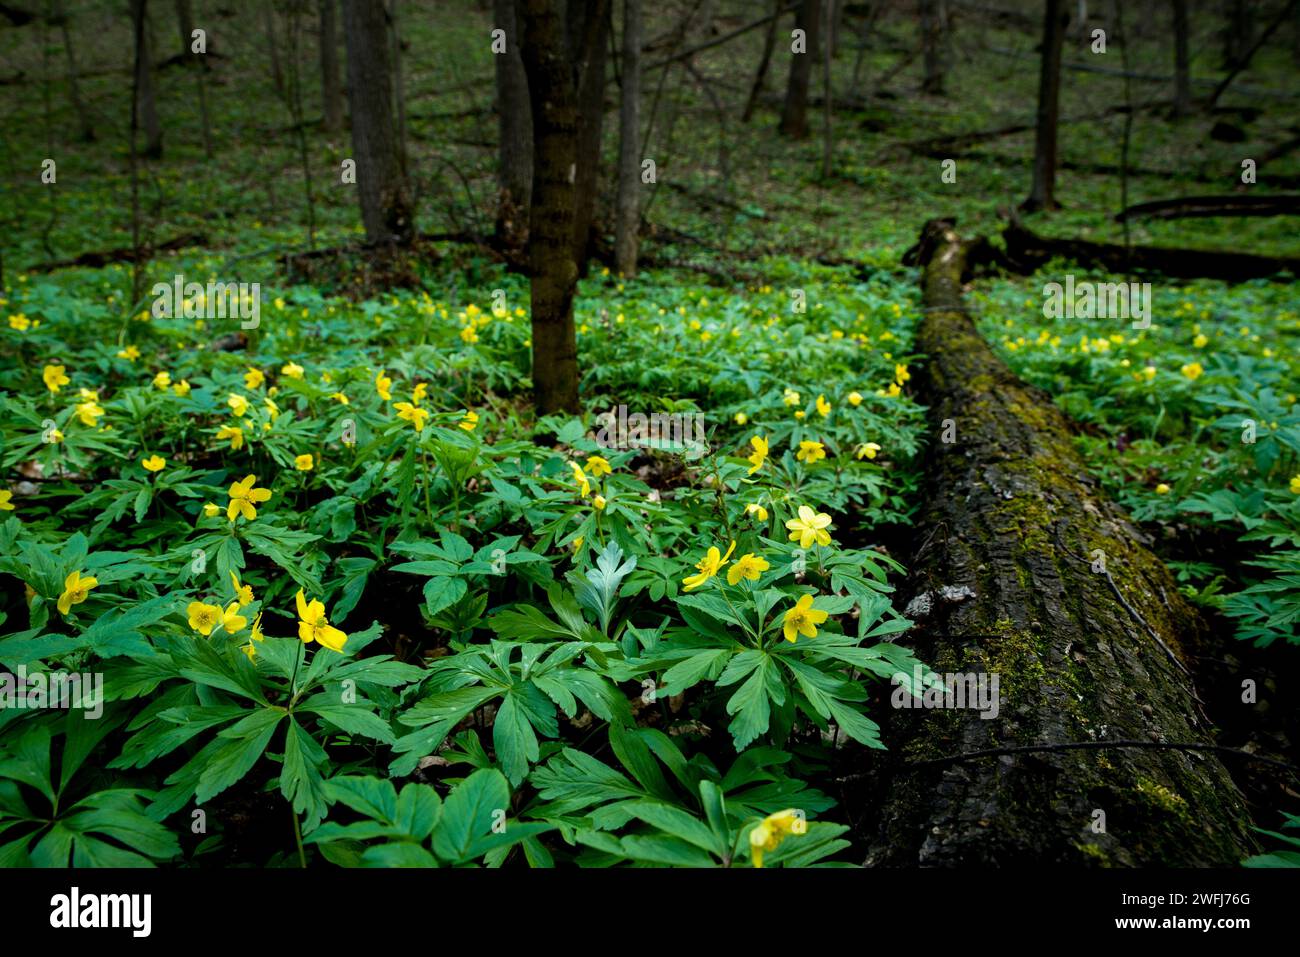 Beautiful wide-angle natural spring landscape, soft focus. A nature scene with blooming yellow flowers growing in the forest. Stock Photo